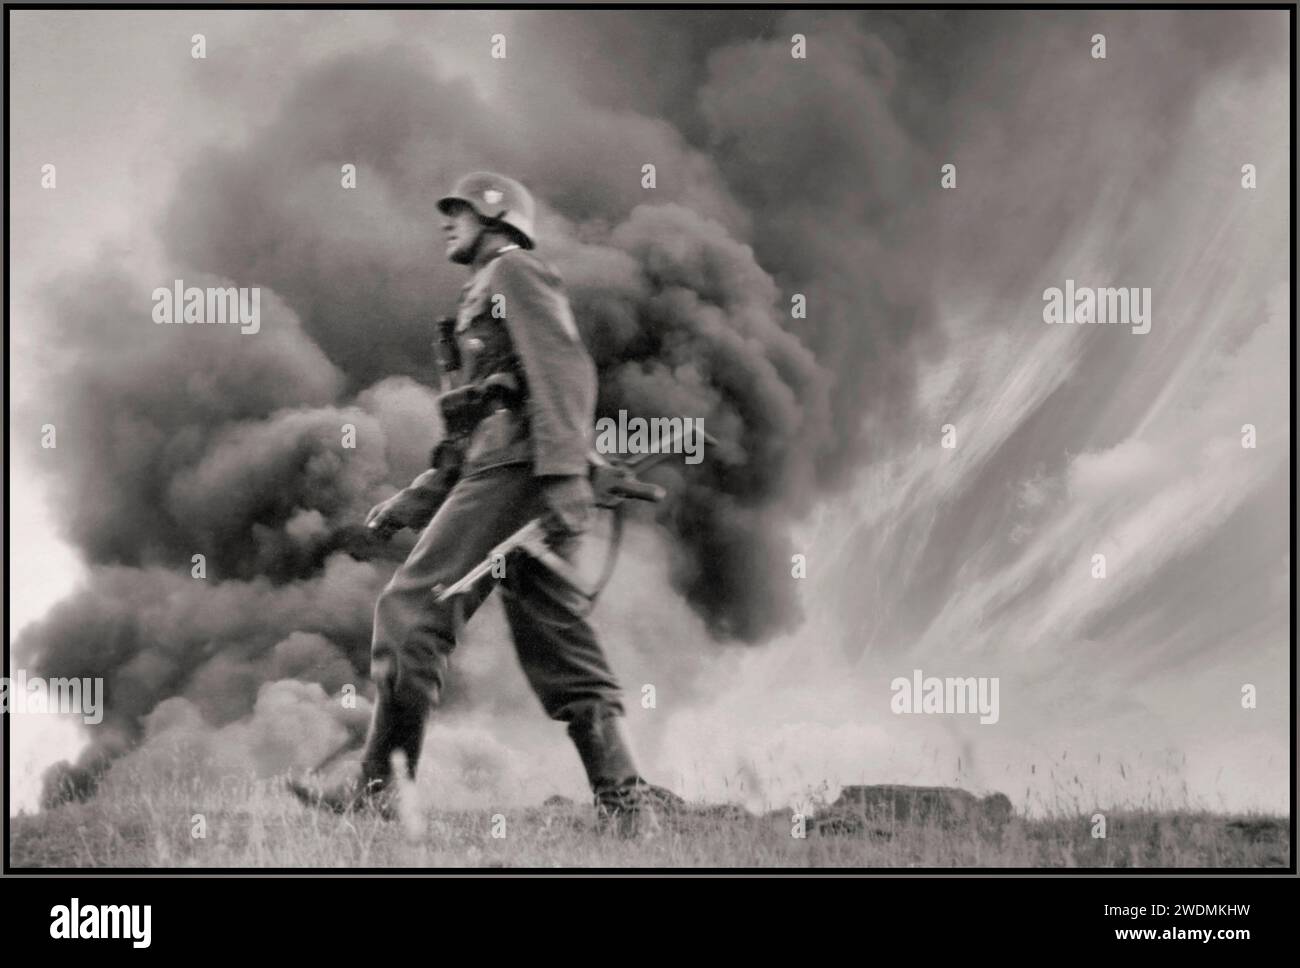 Operation Barbarossa with an advancing Nazi Wehrmacht soldier carrying a machine gun and wearing jack boots, with clouds of smoke in background from a burnt out Soviet village  It was the invasion of the Soviet Union by Nazi Germany and many of its Axis allies, starting on Sunday, 22 June 1941, during the Second World War. It was the largest land offensive in human history, with around 10 million combatants taking part Stock Photo